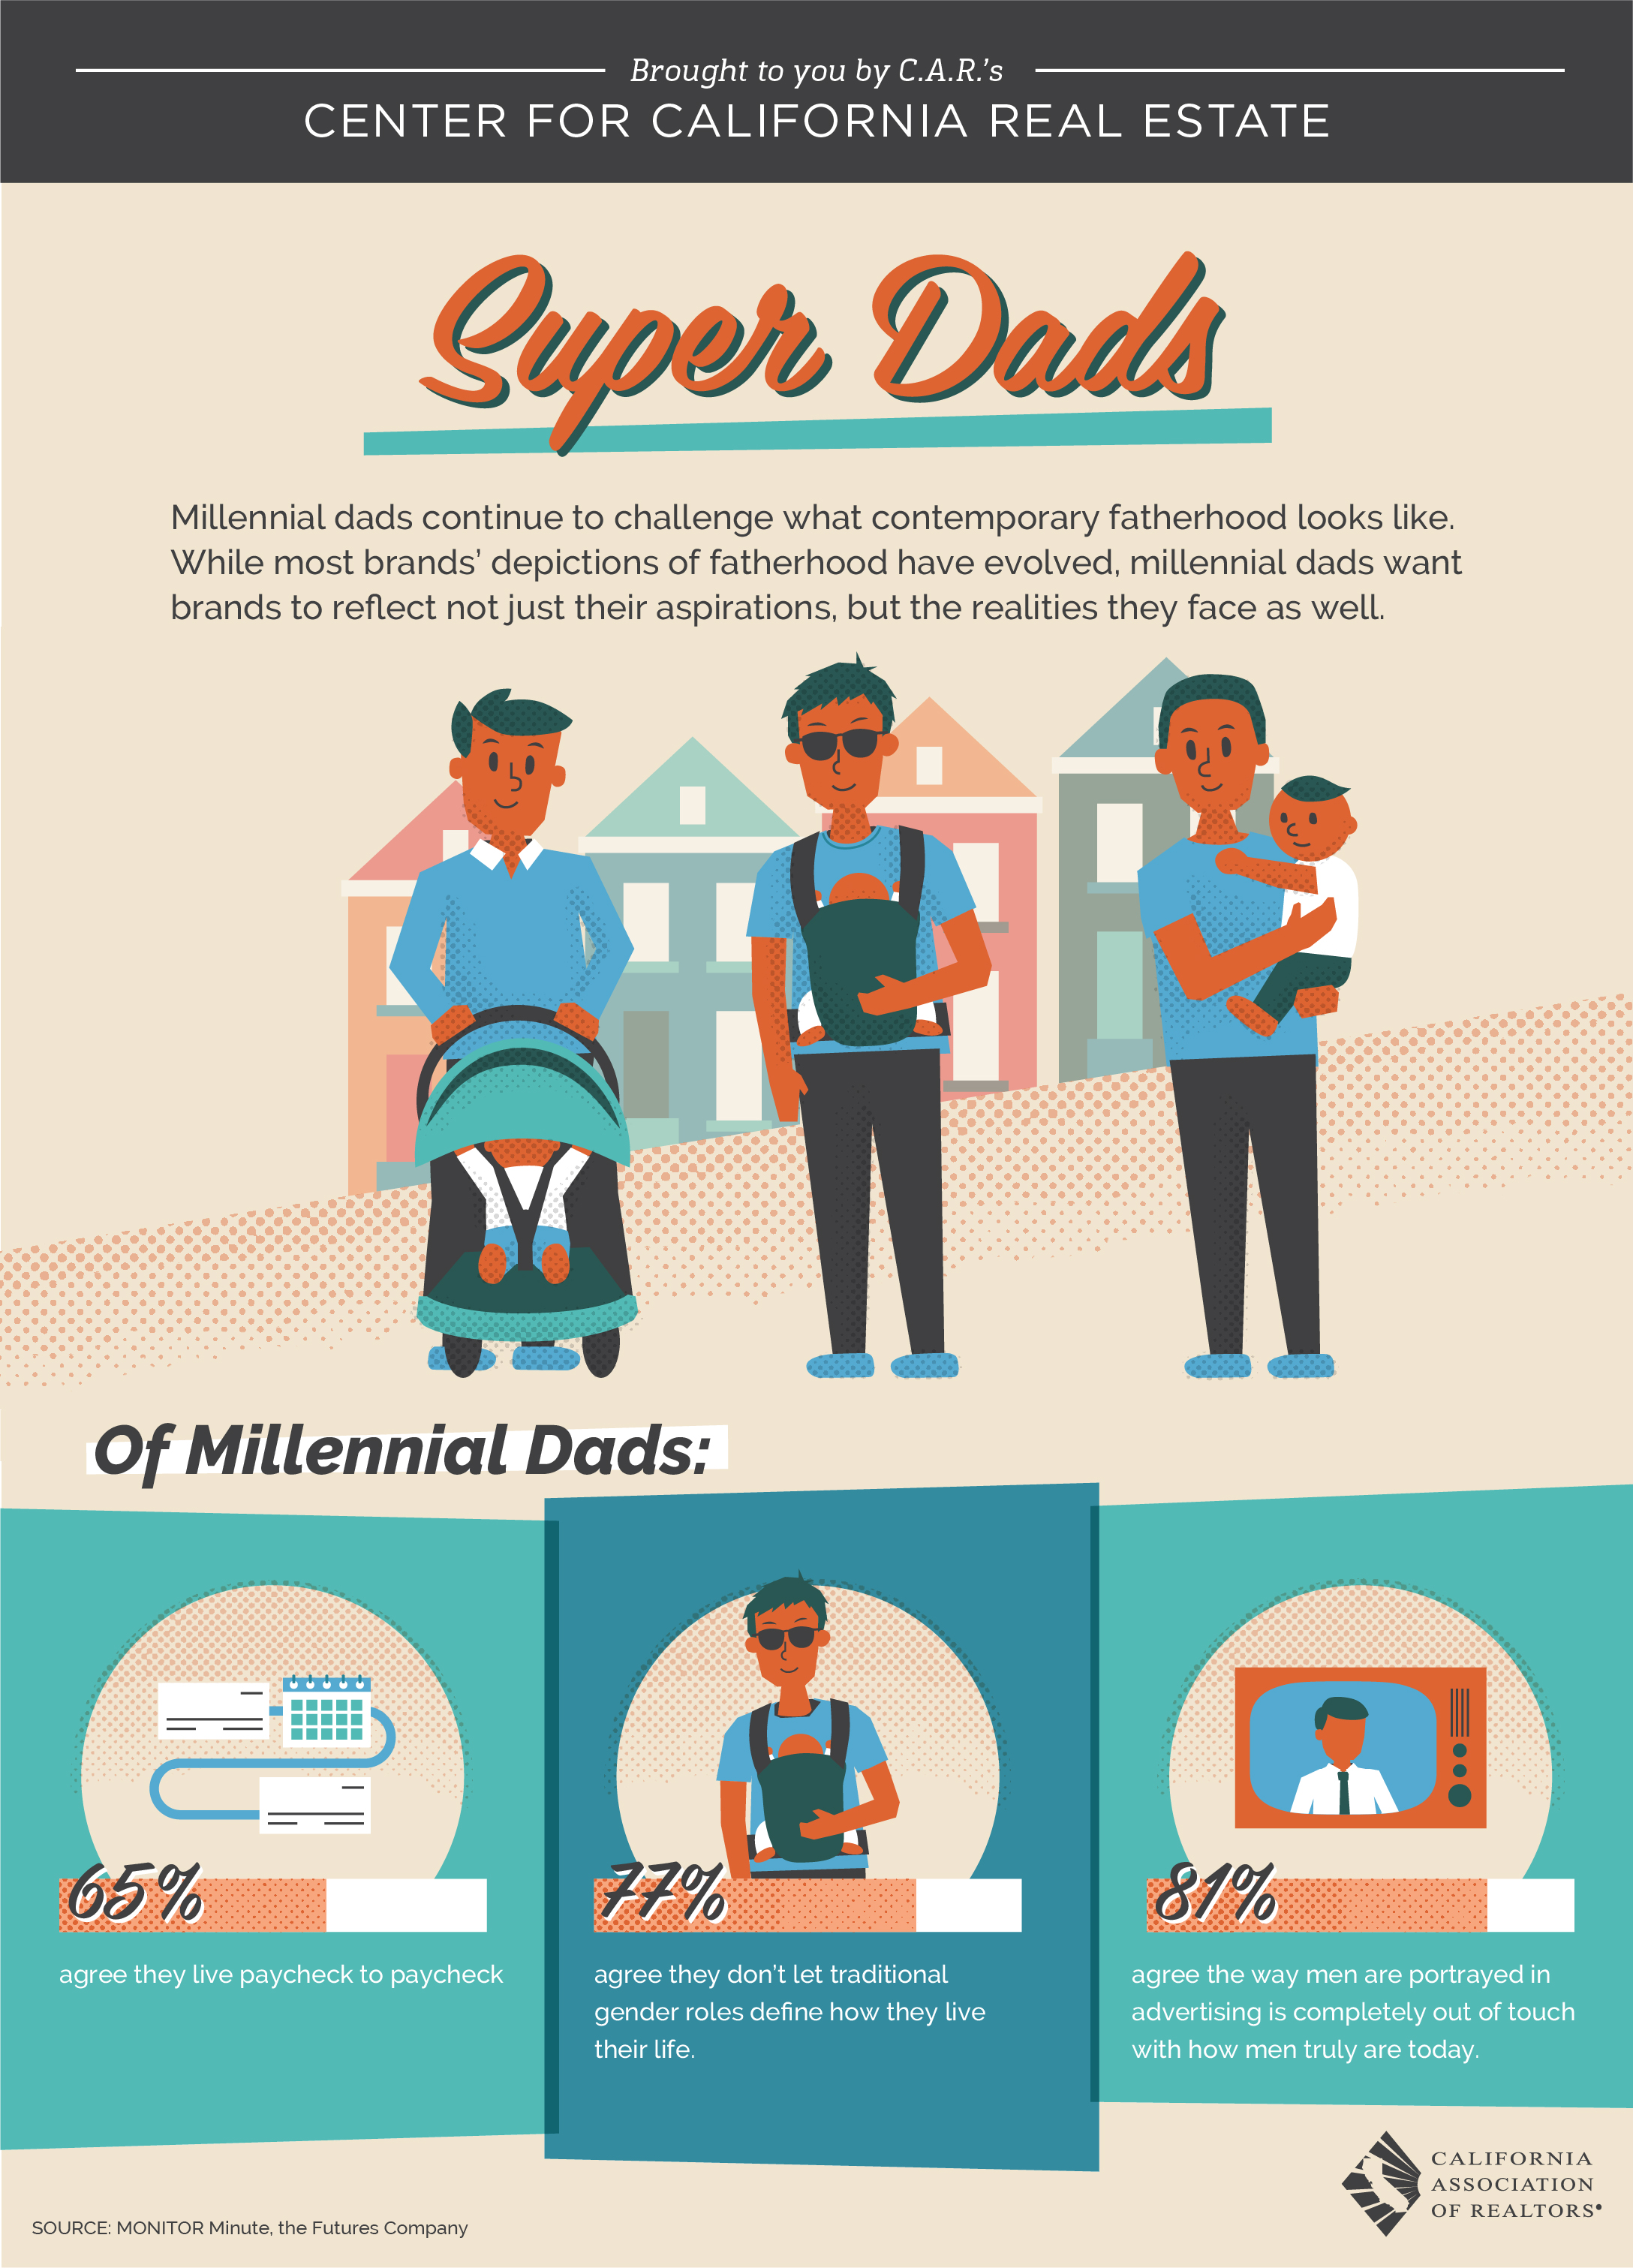 Millennial dads continue to challenge what contemporary fatherhood looks like. While most brands' depictions of fatherhood have evolved, millennial dads want brands to reflect not just their aspirations, but the realities they face as well.